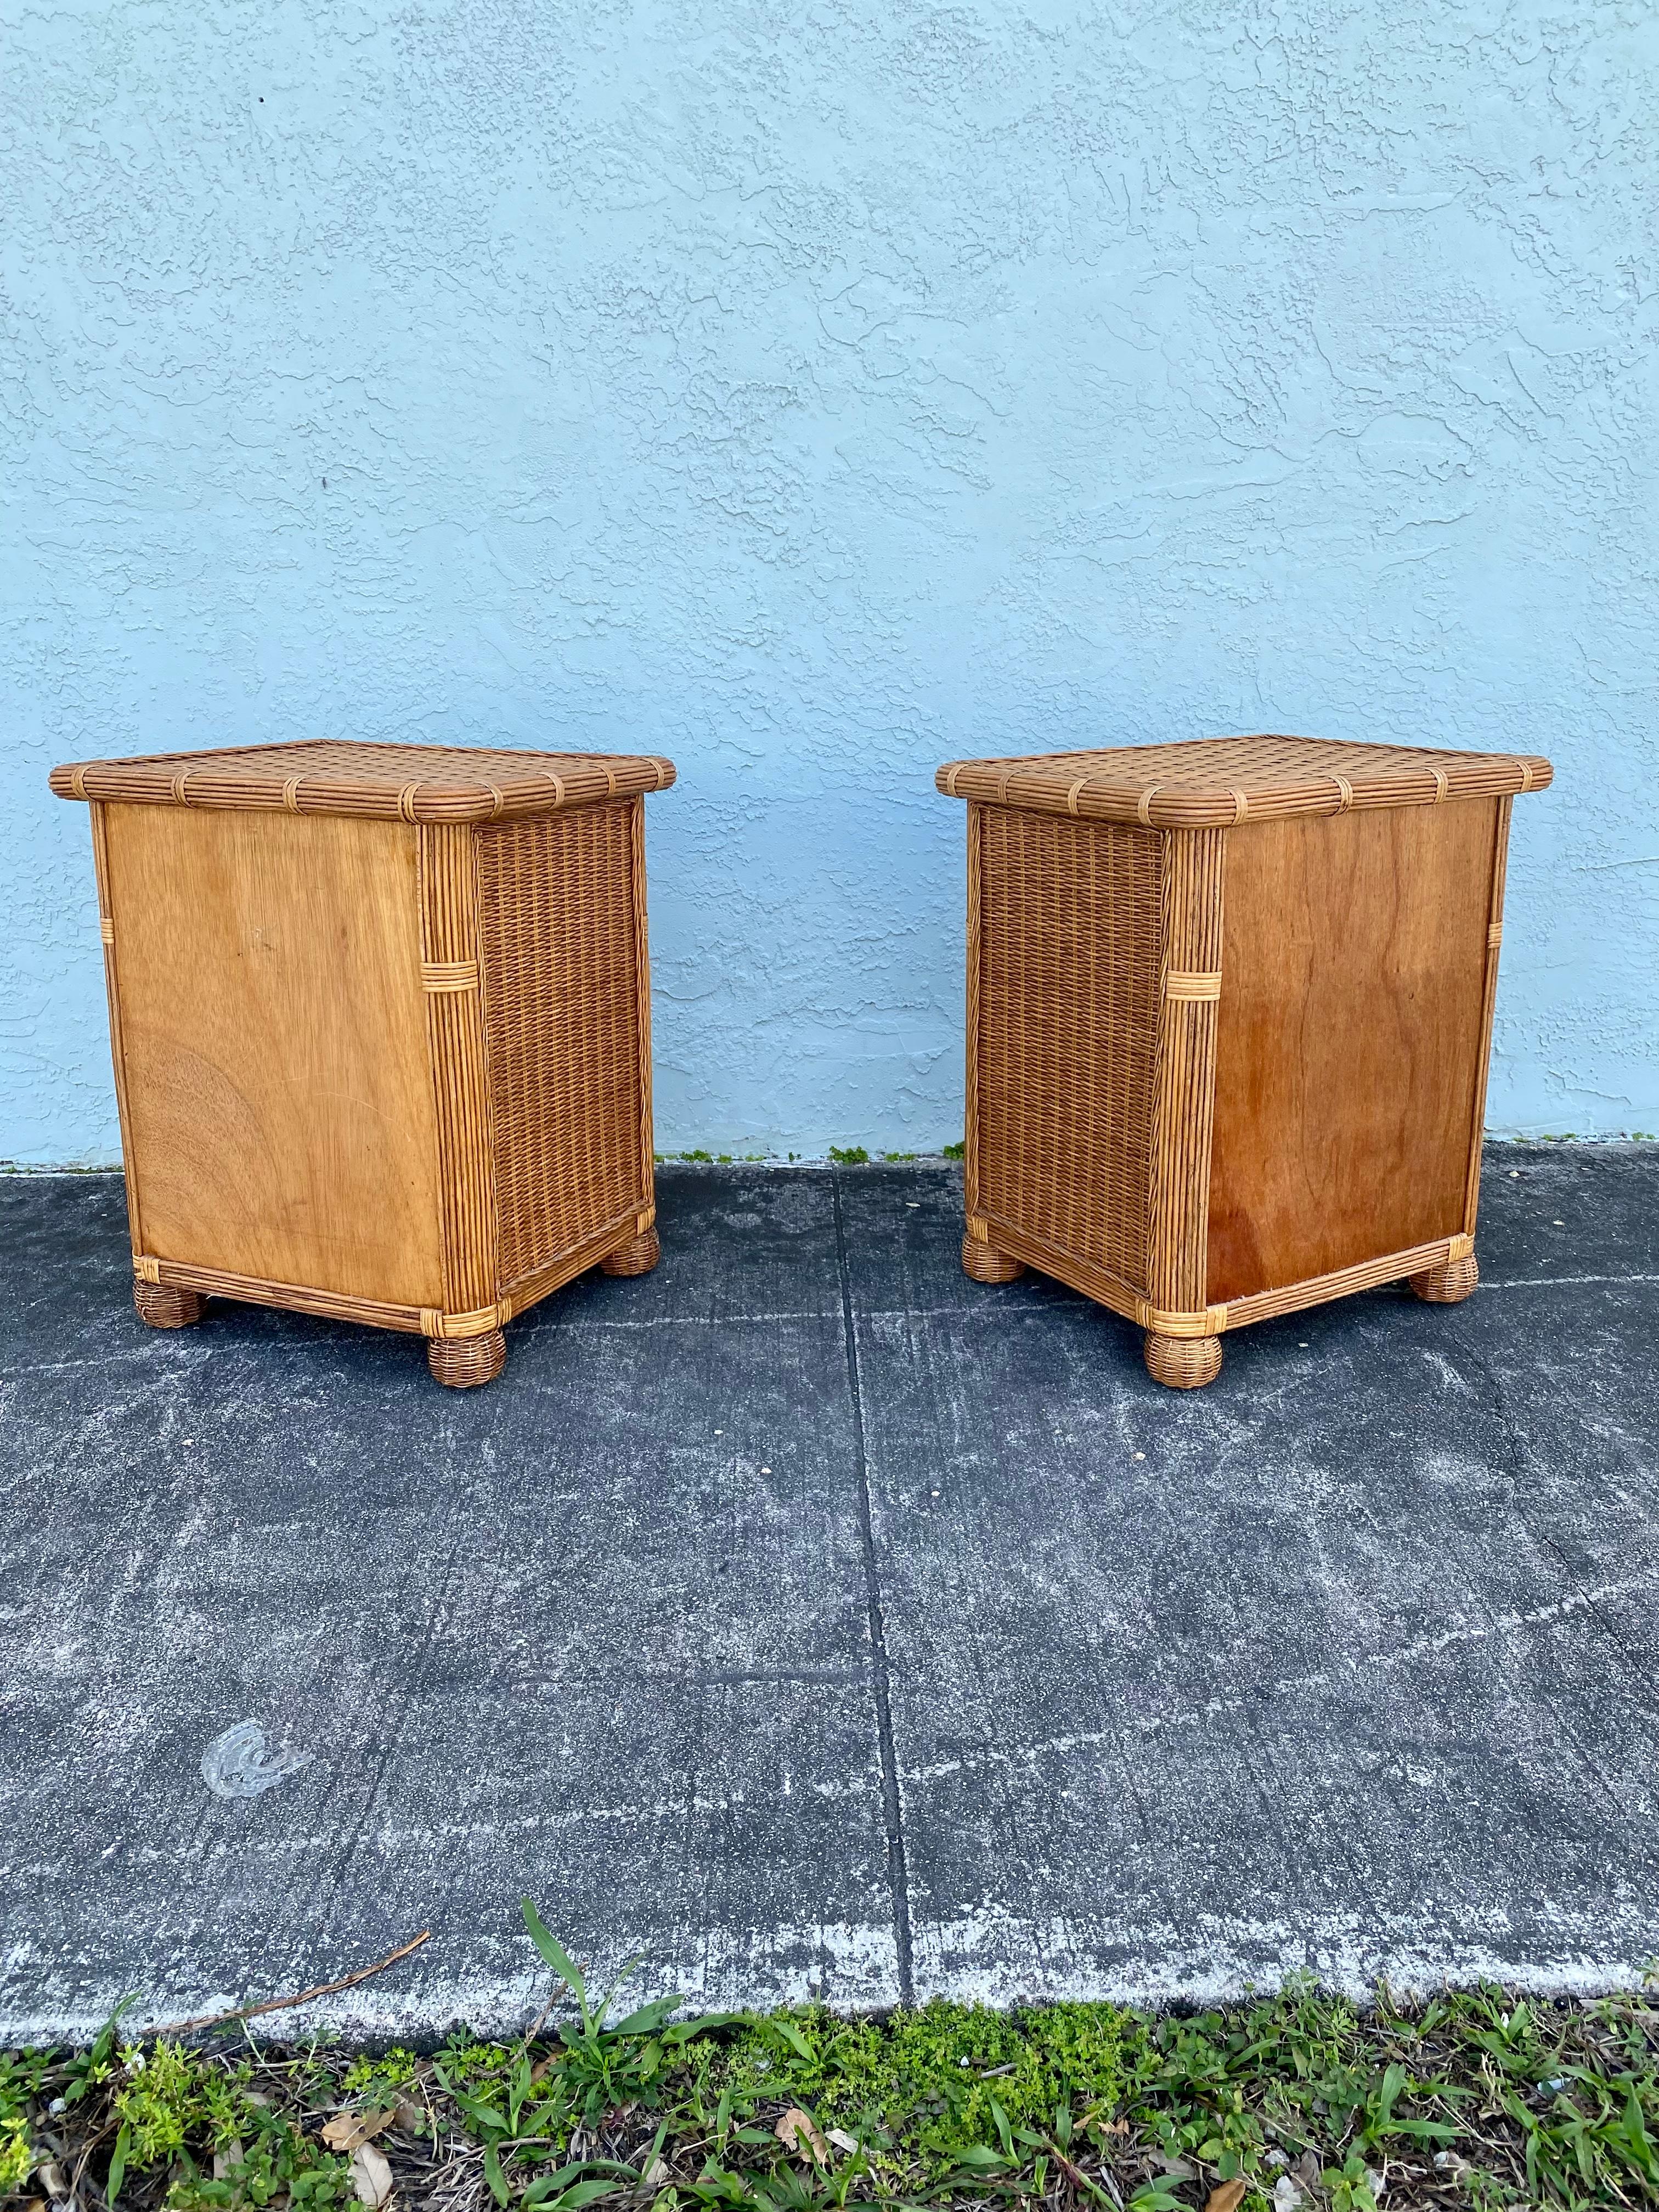 1970s Rattan Wicker End Tables Night Stands, Set of 2 In Good Condition For Sale In Fort Lauderdale, FL